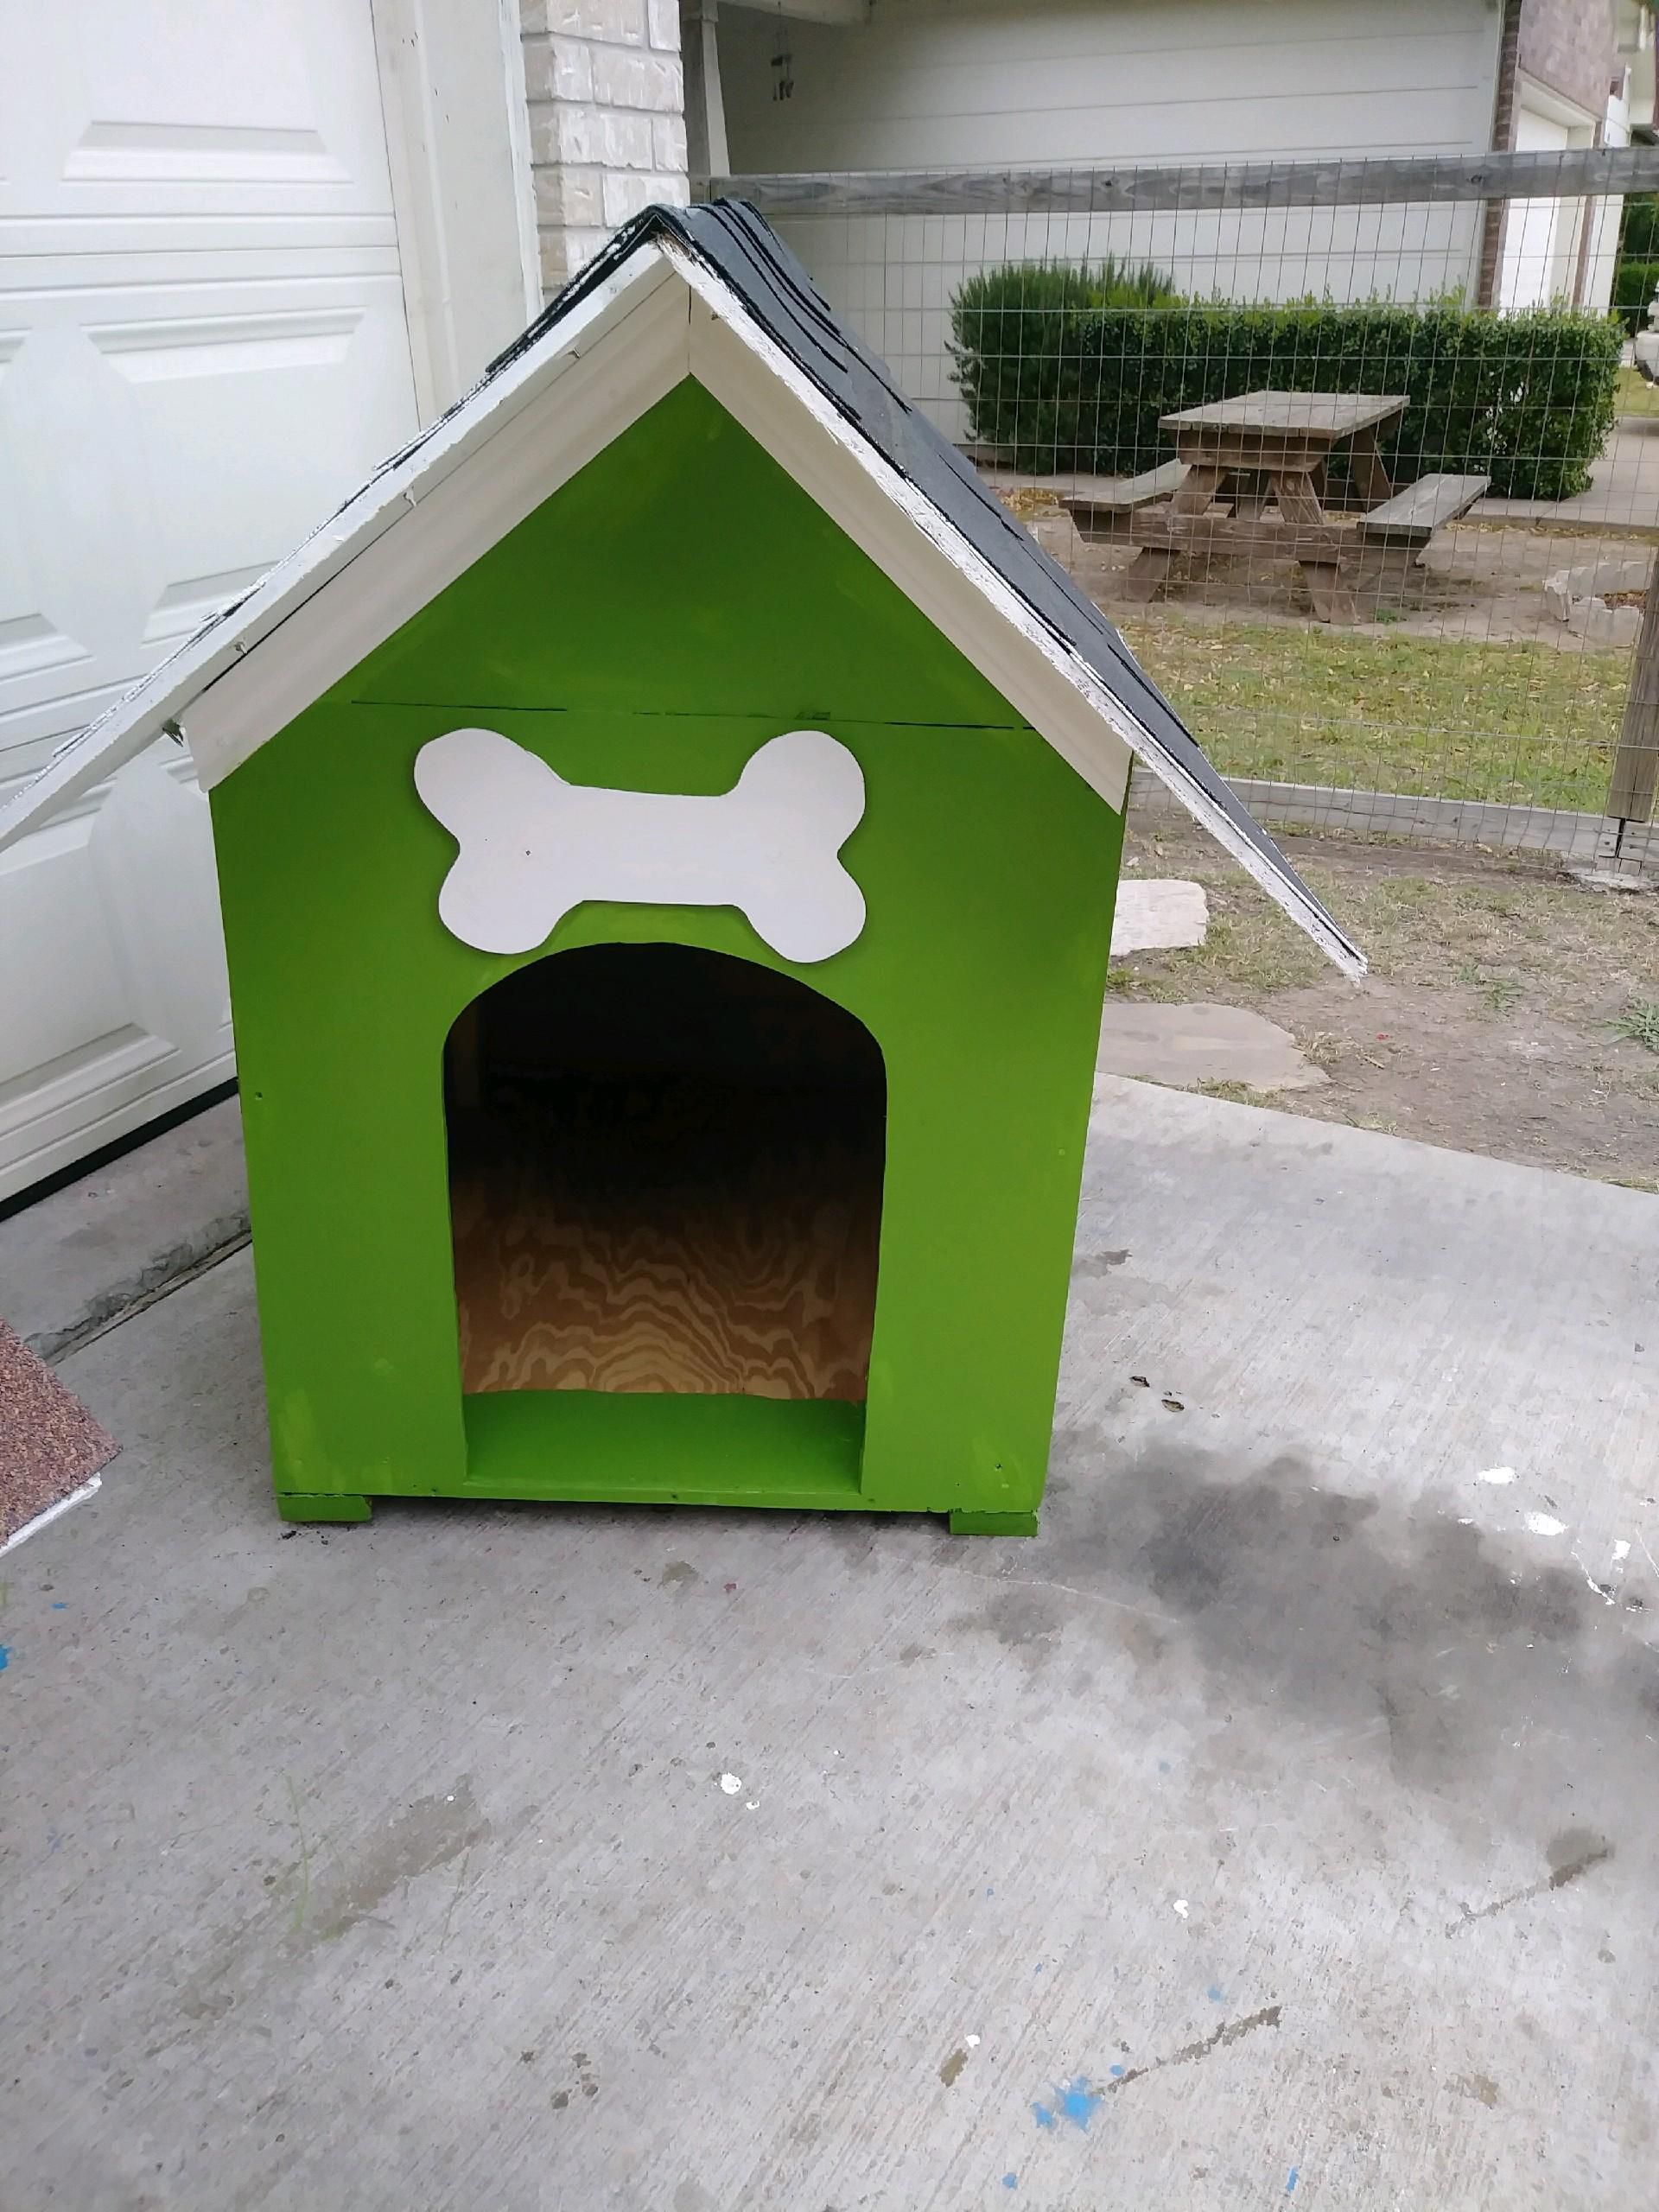 2 Dog houses price is $60.00 each or $100.00 for both